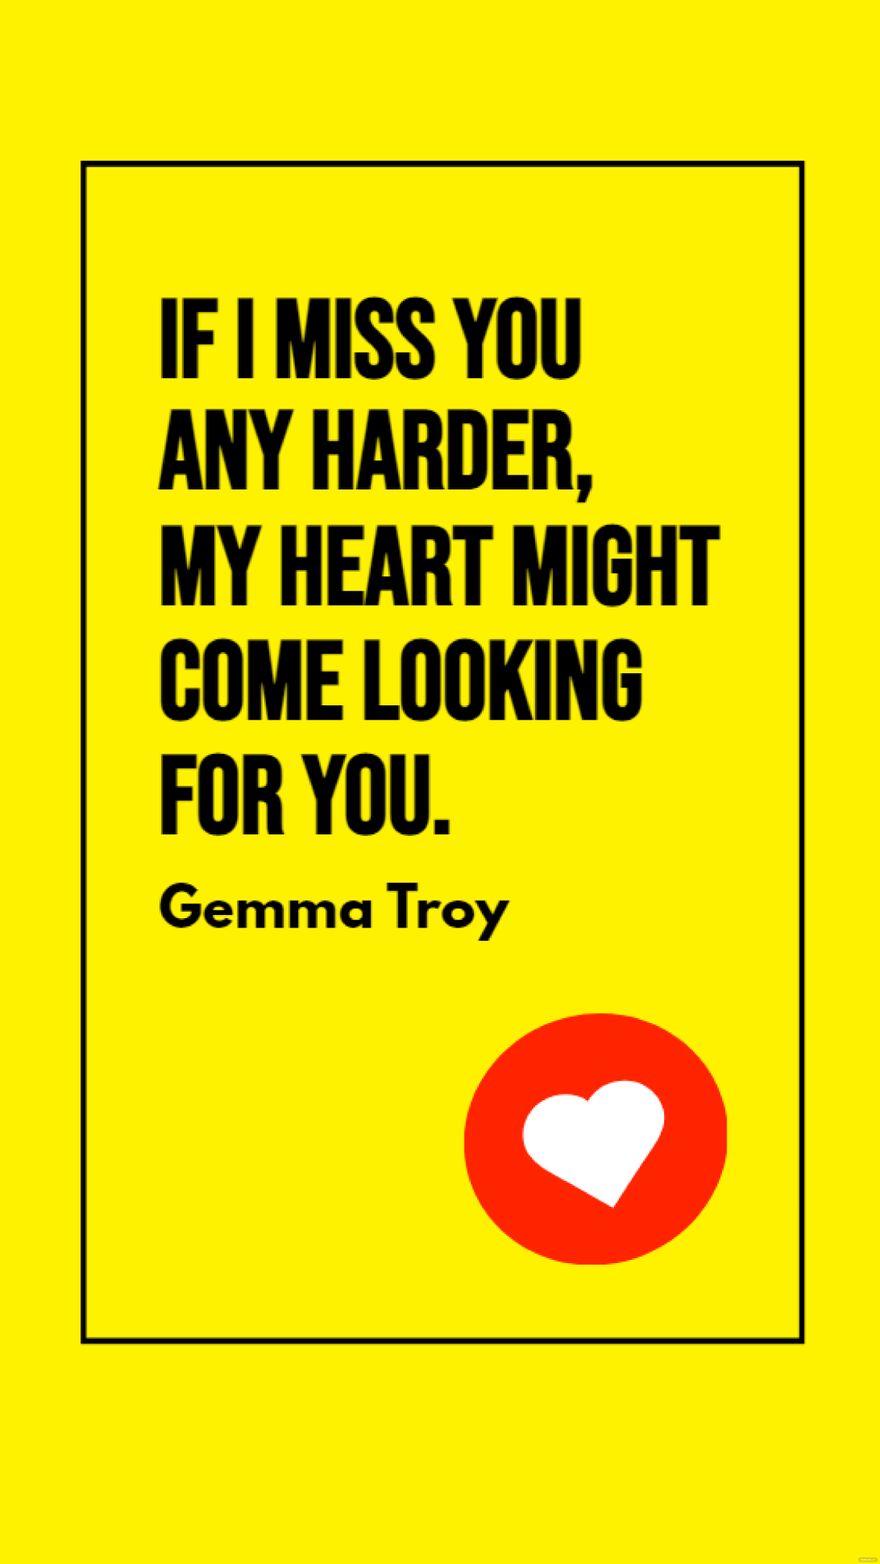 Free Gemma Troy - If I miss you any harder, my heart might come looking for you. in JPG